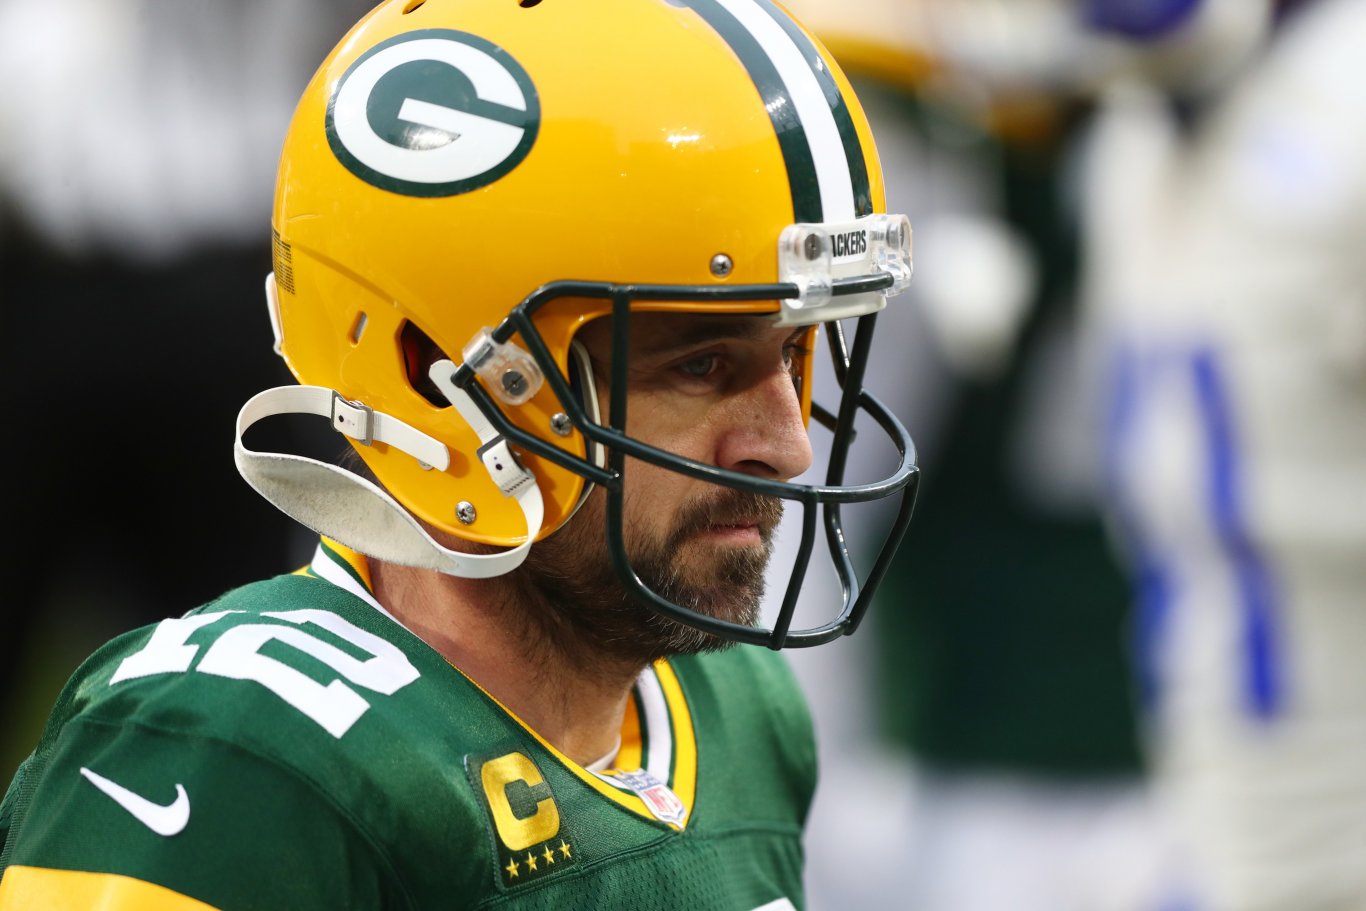 Retired numbers: Packers couldn't even get that right in the gory years